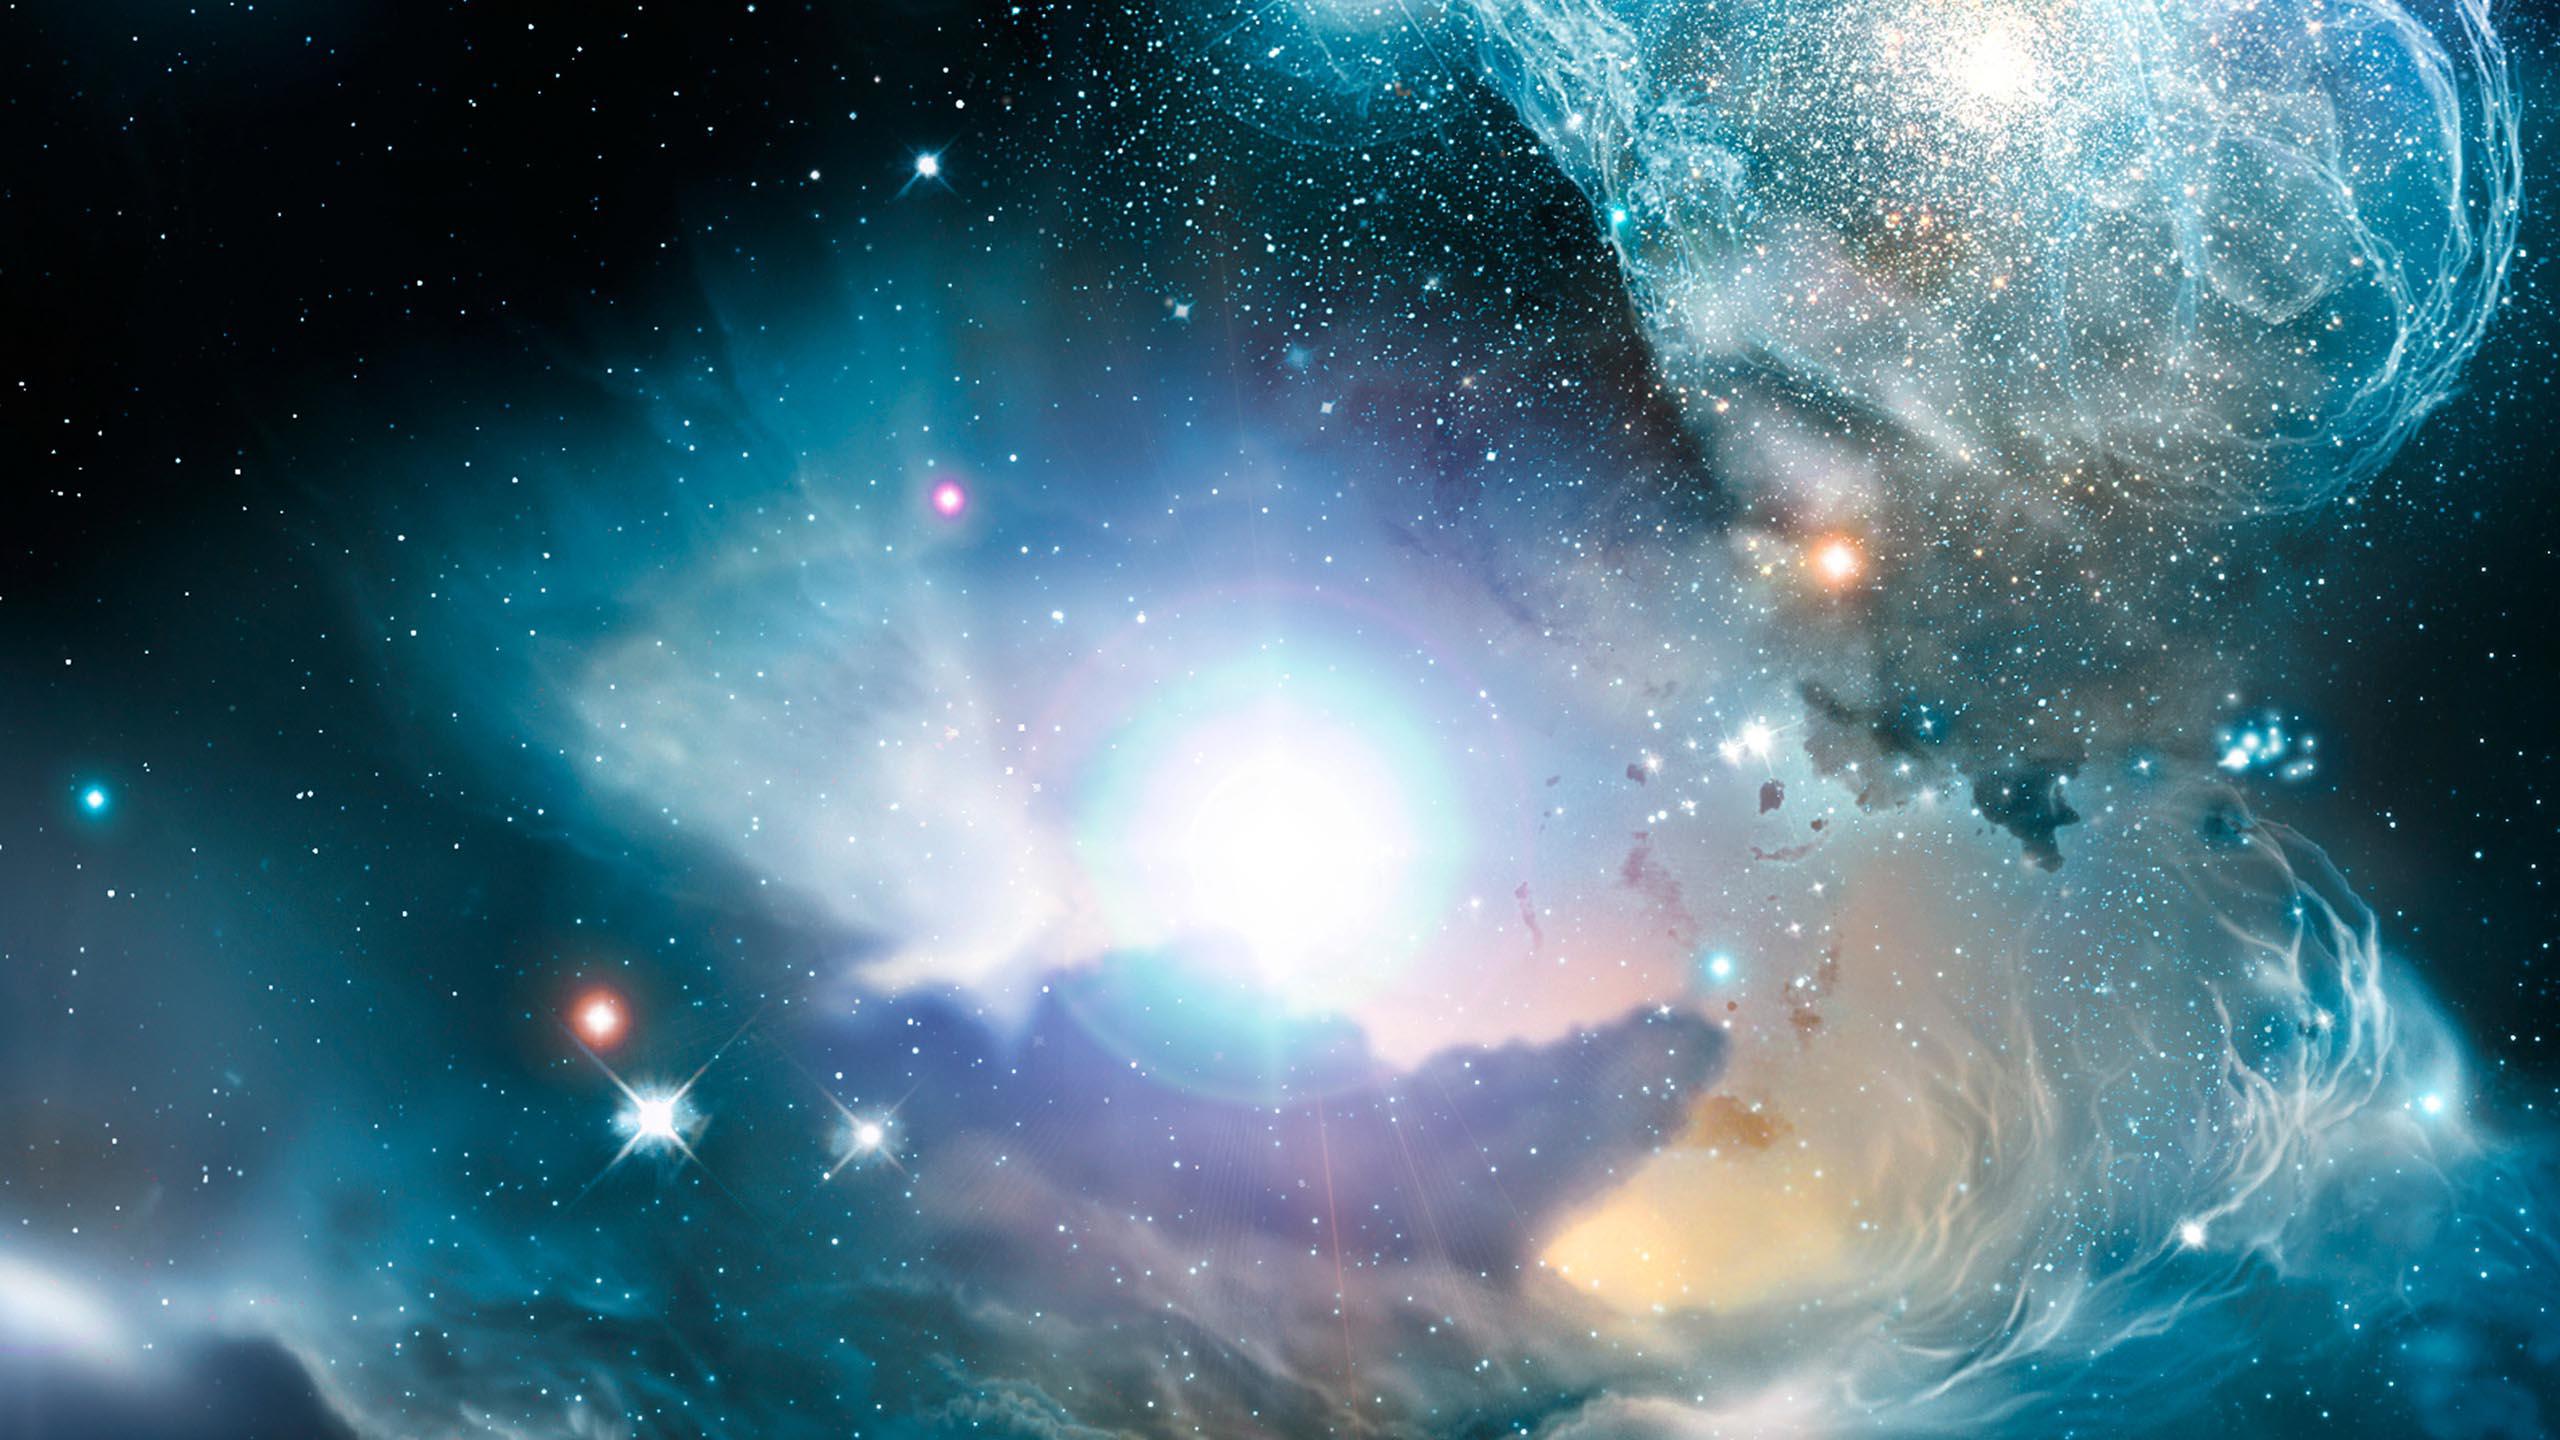 AMAZING SPACE WALLPAPER - (#110817) - HD Wallpapers ...